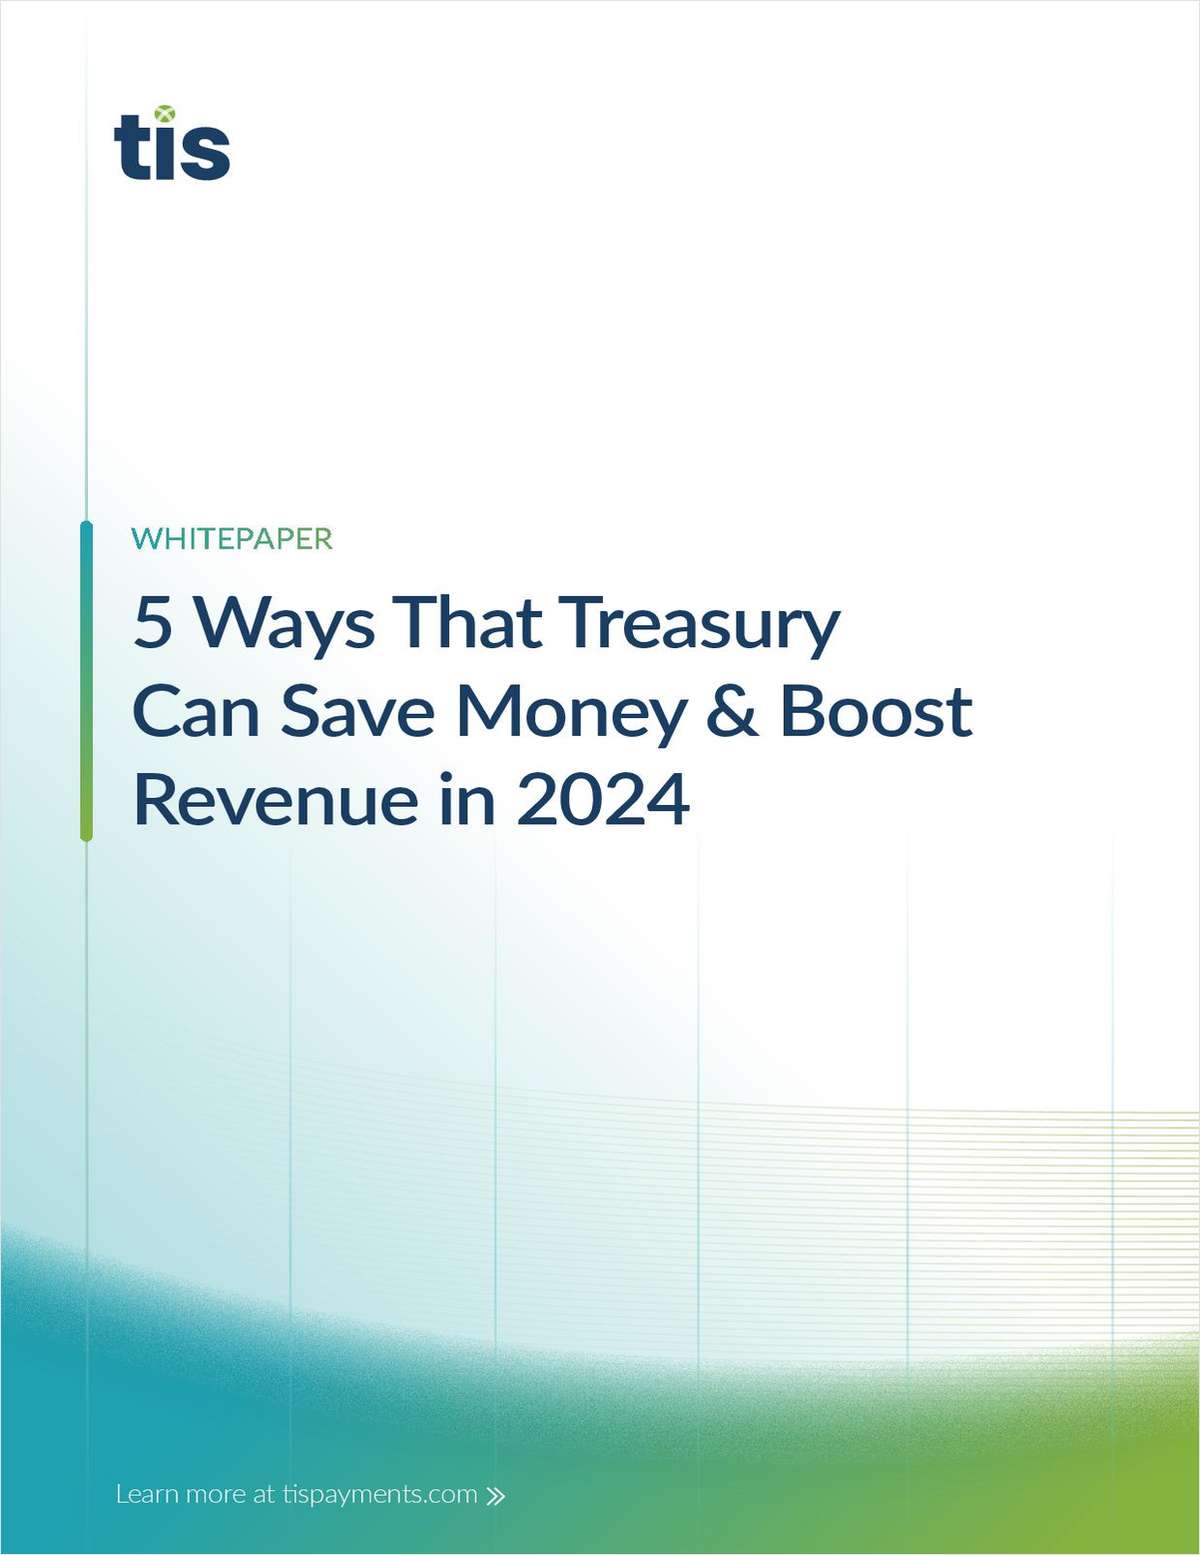 5 Ways Treasury Can Save Money and Boost Revenue in 2024 link